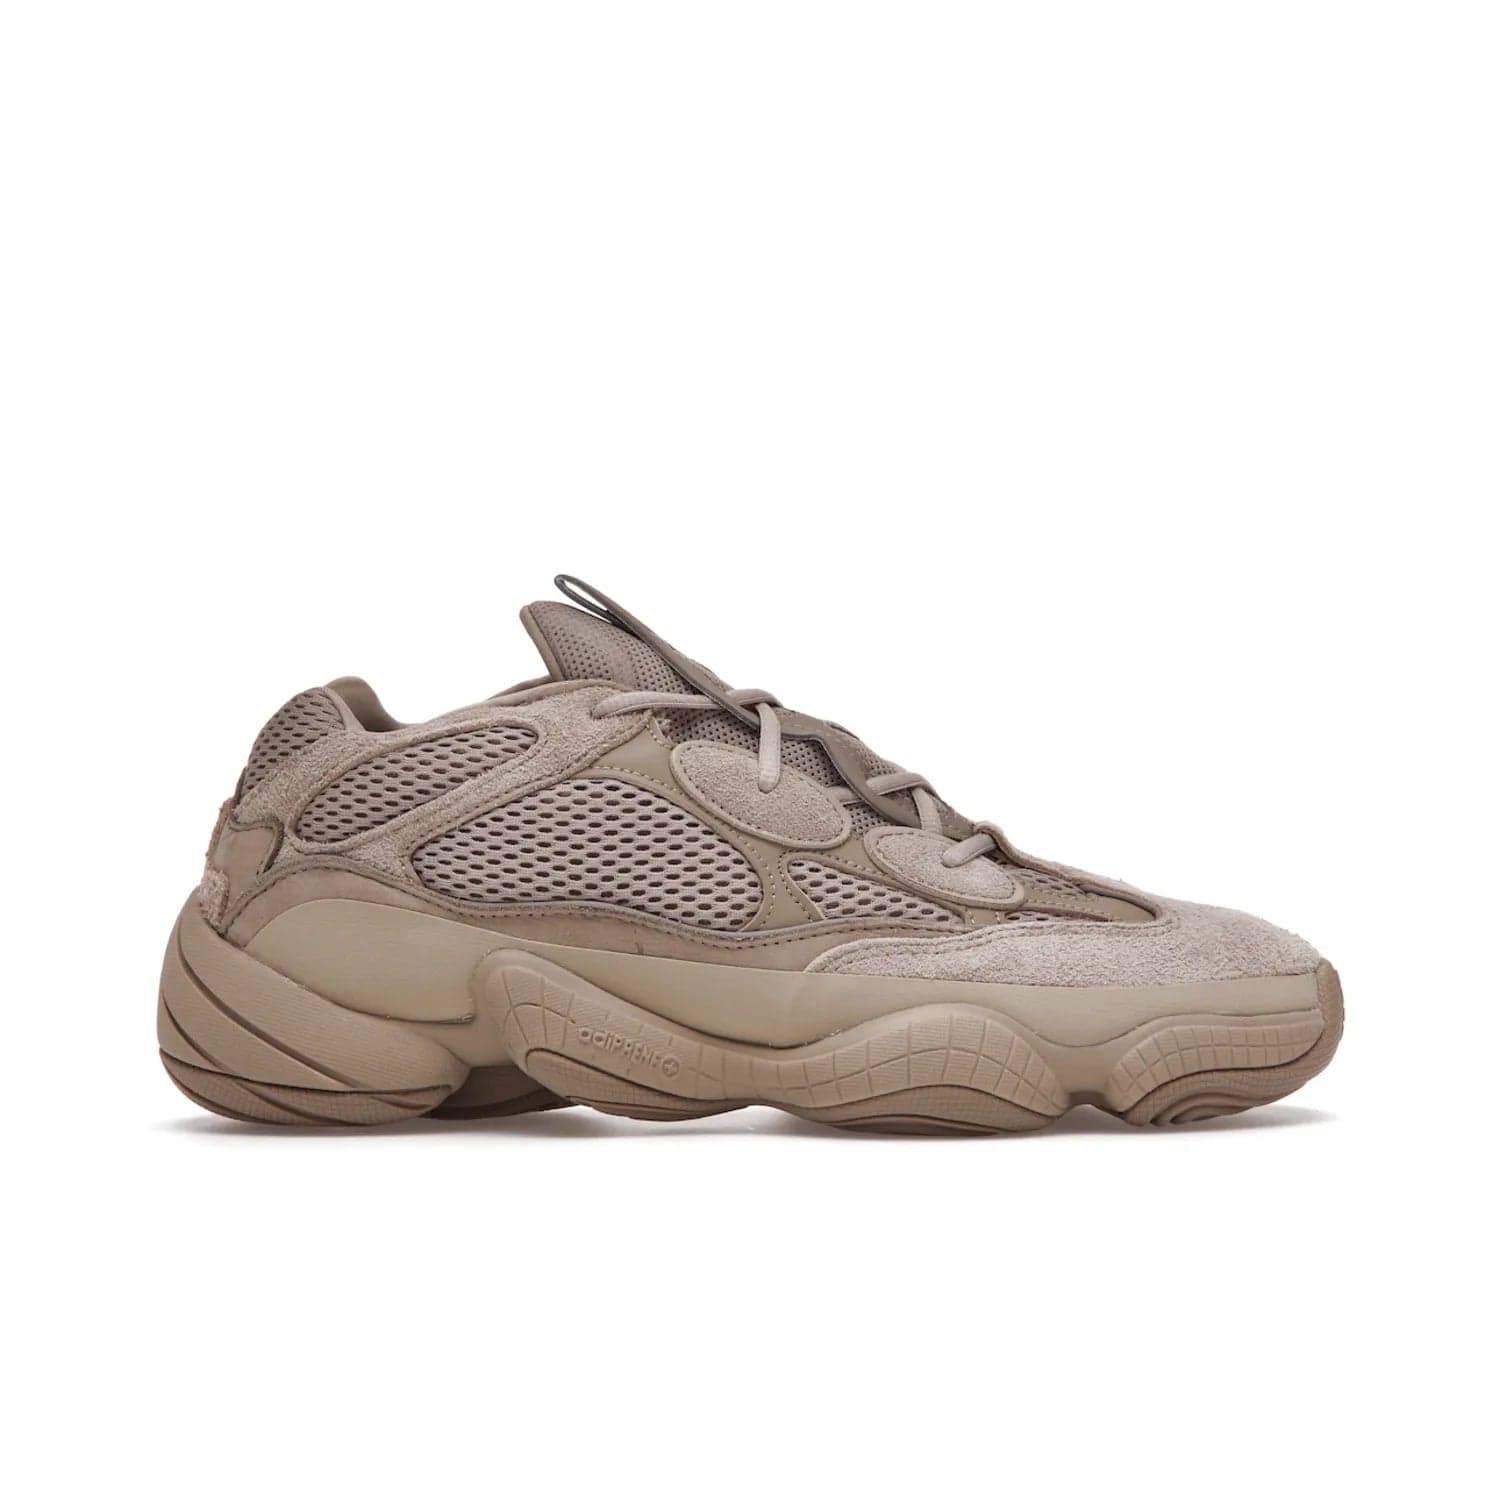 adidas Yeezy 500 Taupe Light - Image 1 - Only at www.BallersClubKickz.com - The adidas Yeezy 500 Taupe Light combines mesh, leather, and suede, with a durable adiPRENE sole for an eye-catching accessory. Reflective piping adds the perfect finishing touches to this unique silhouette. Ideal for any wardrobe, releasing in June 2021.